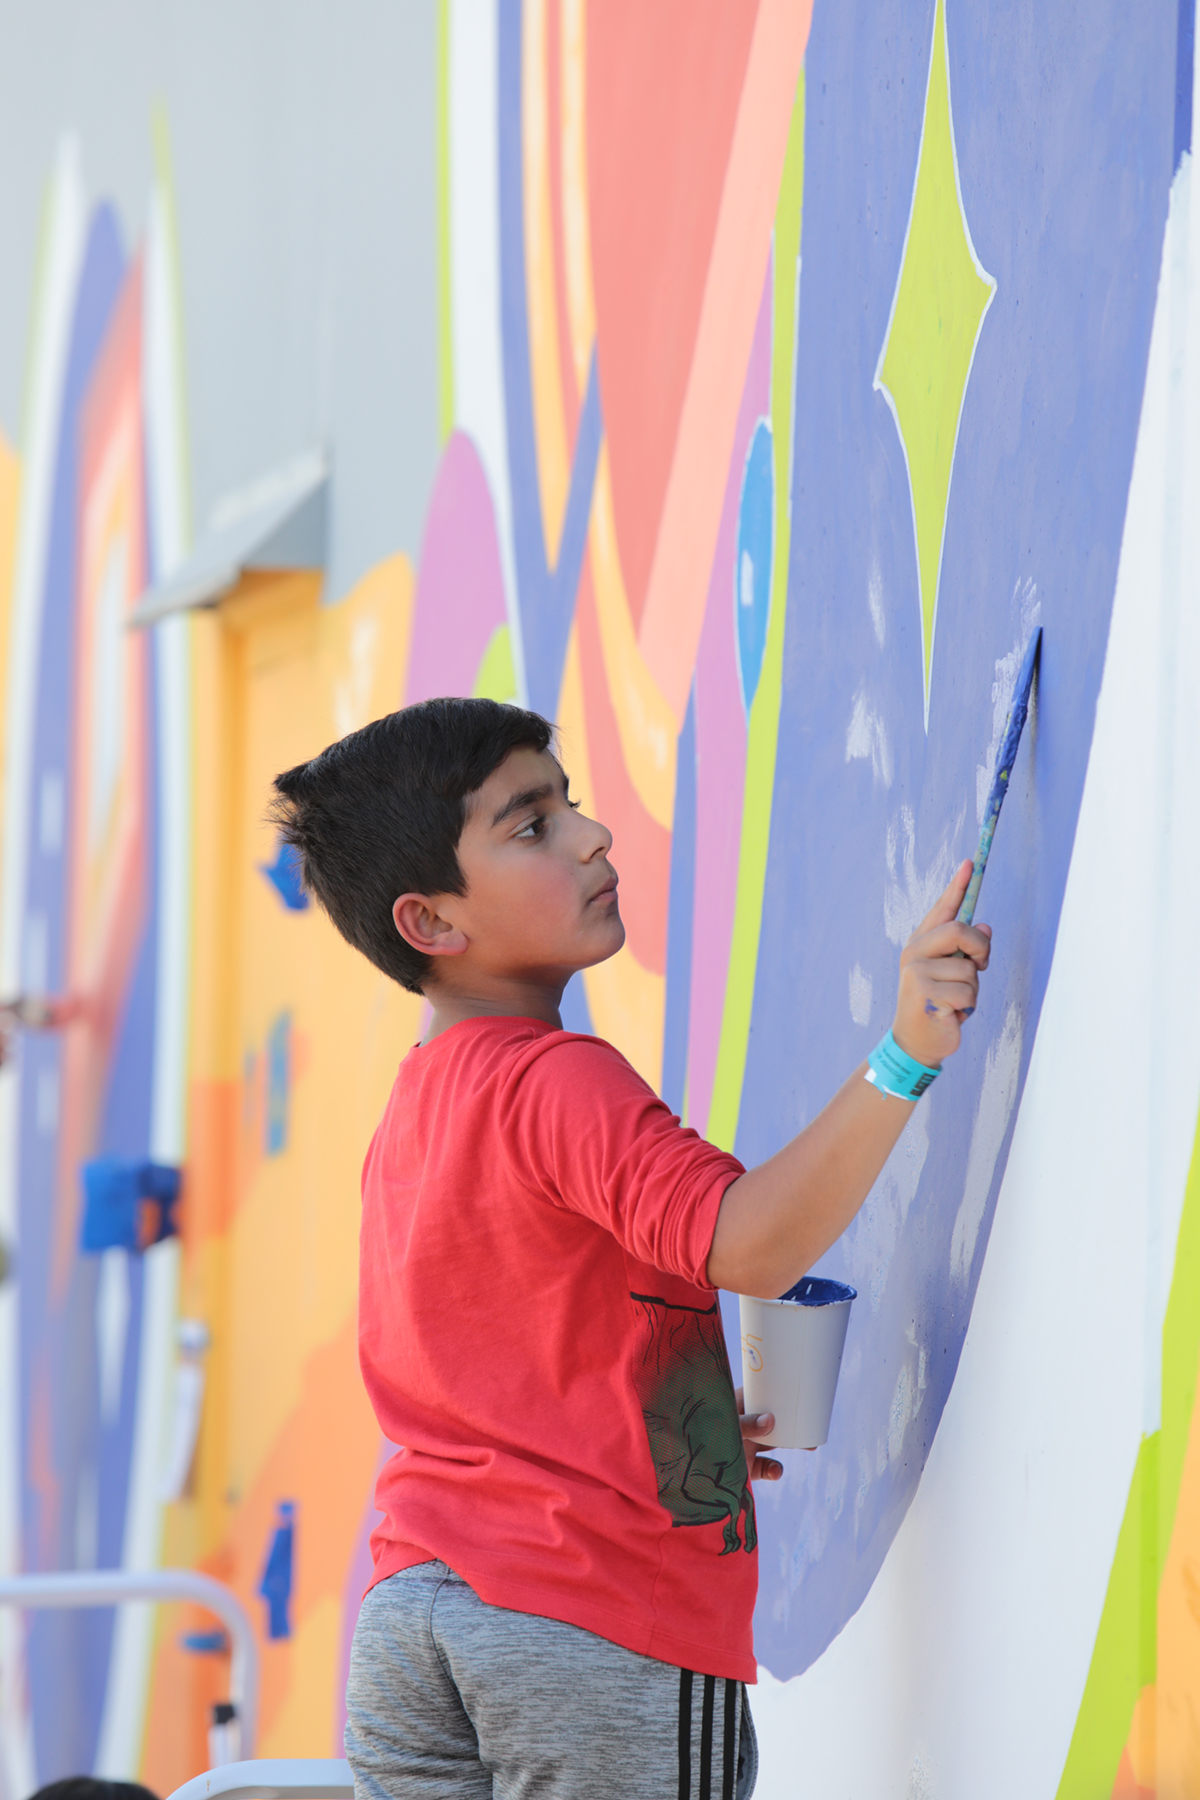 A young teen paints a portion of a wall mural.